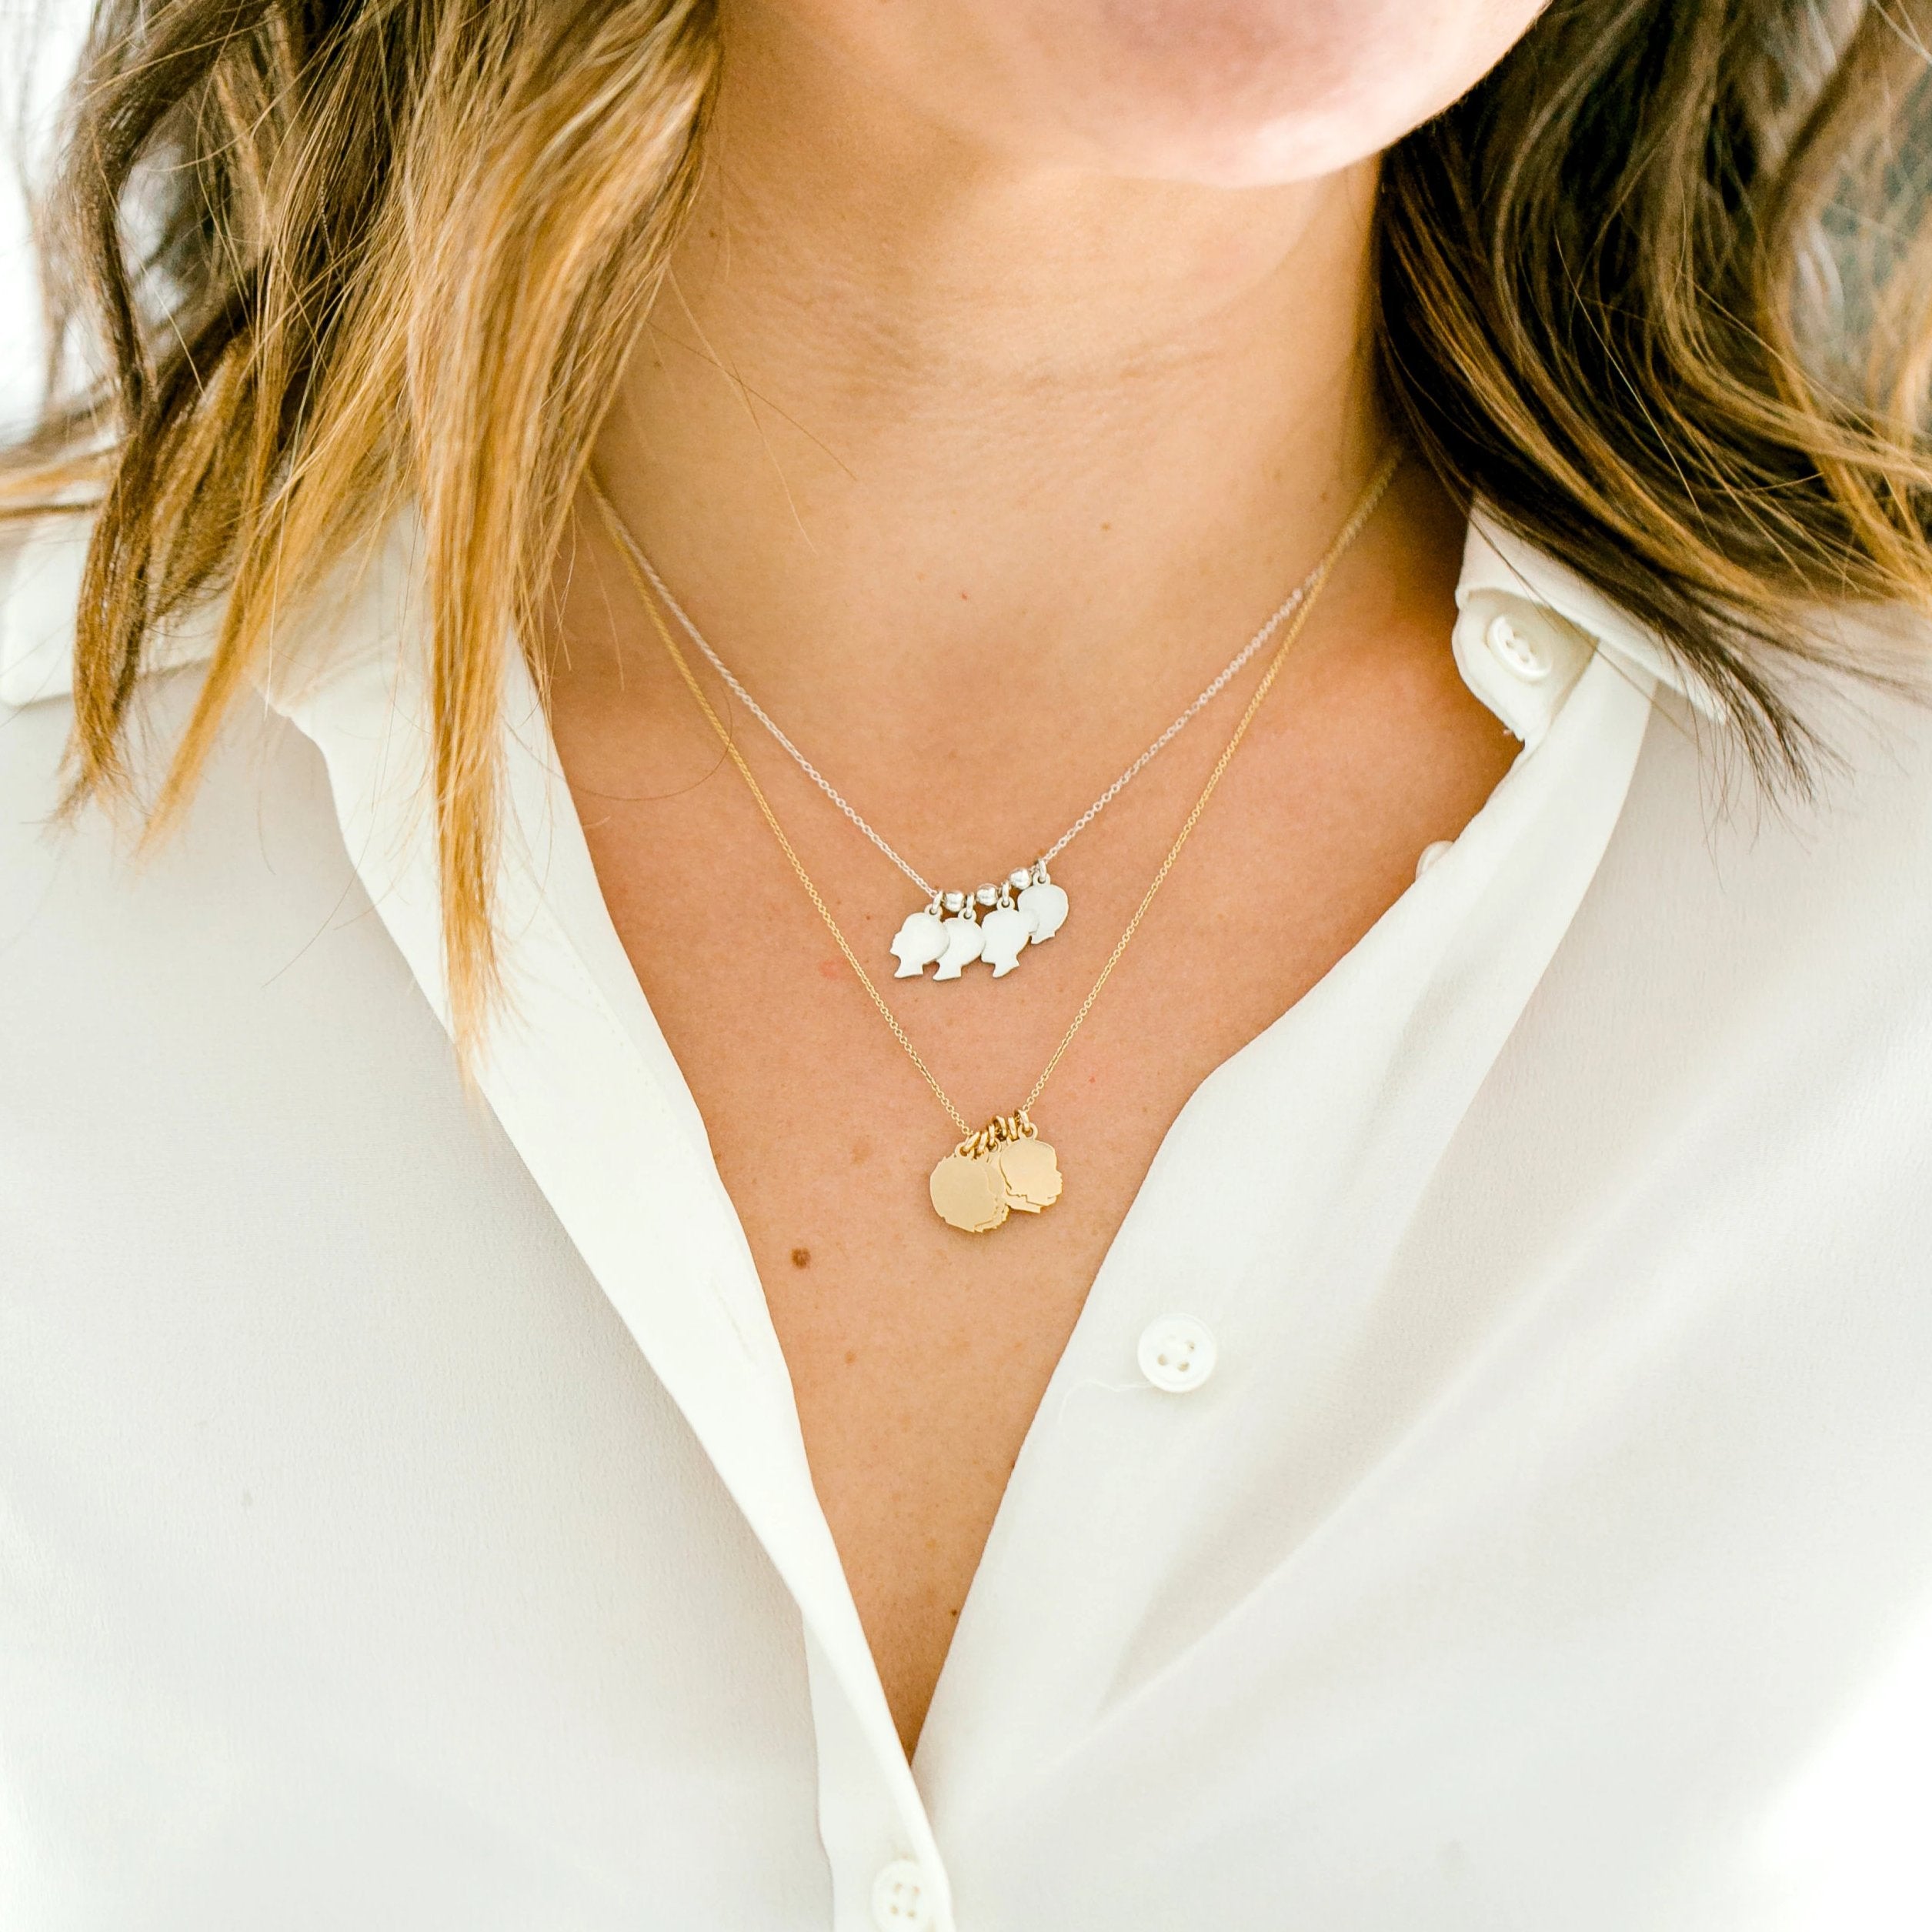 14k Gold Tiny Silhouette Charm Necklace with Delicate Gold Chain | Vana  Chupp Studio